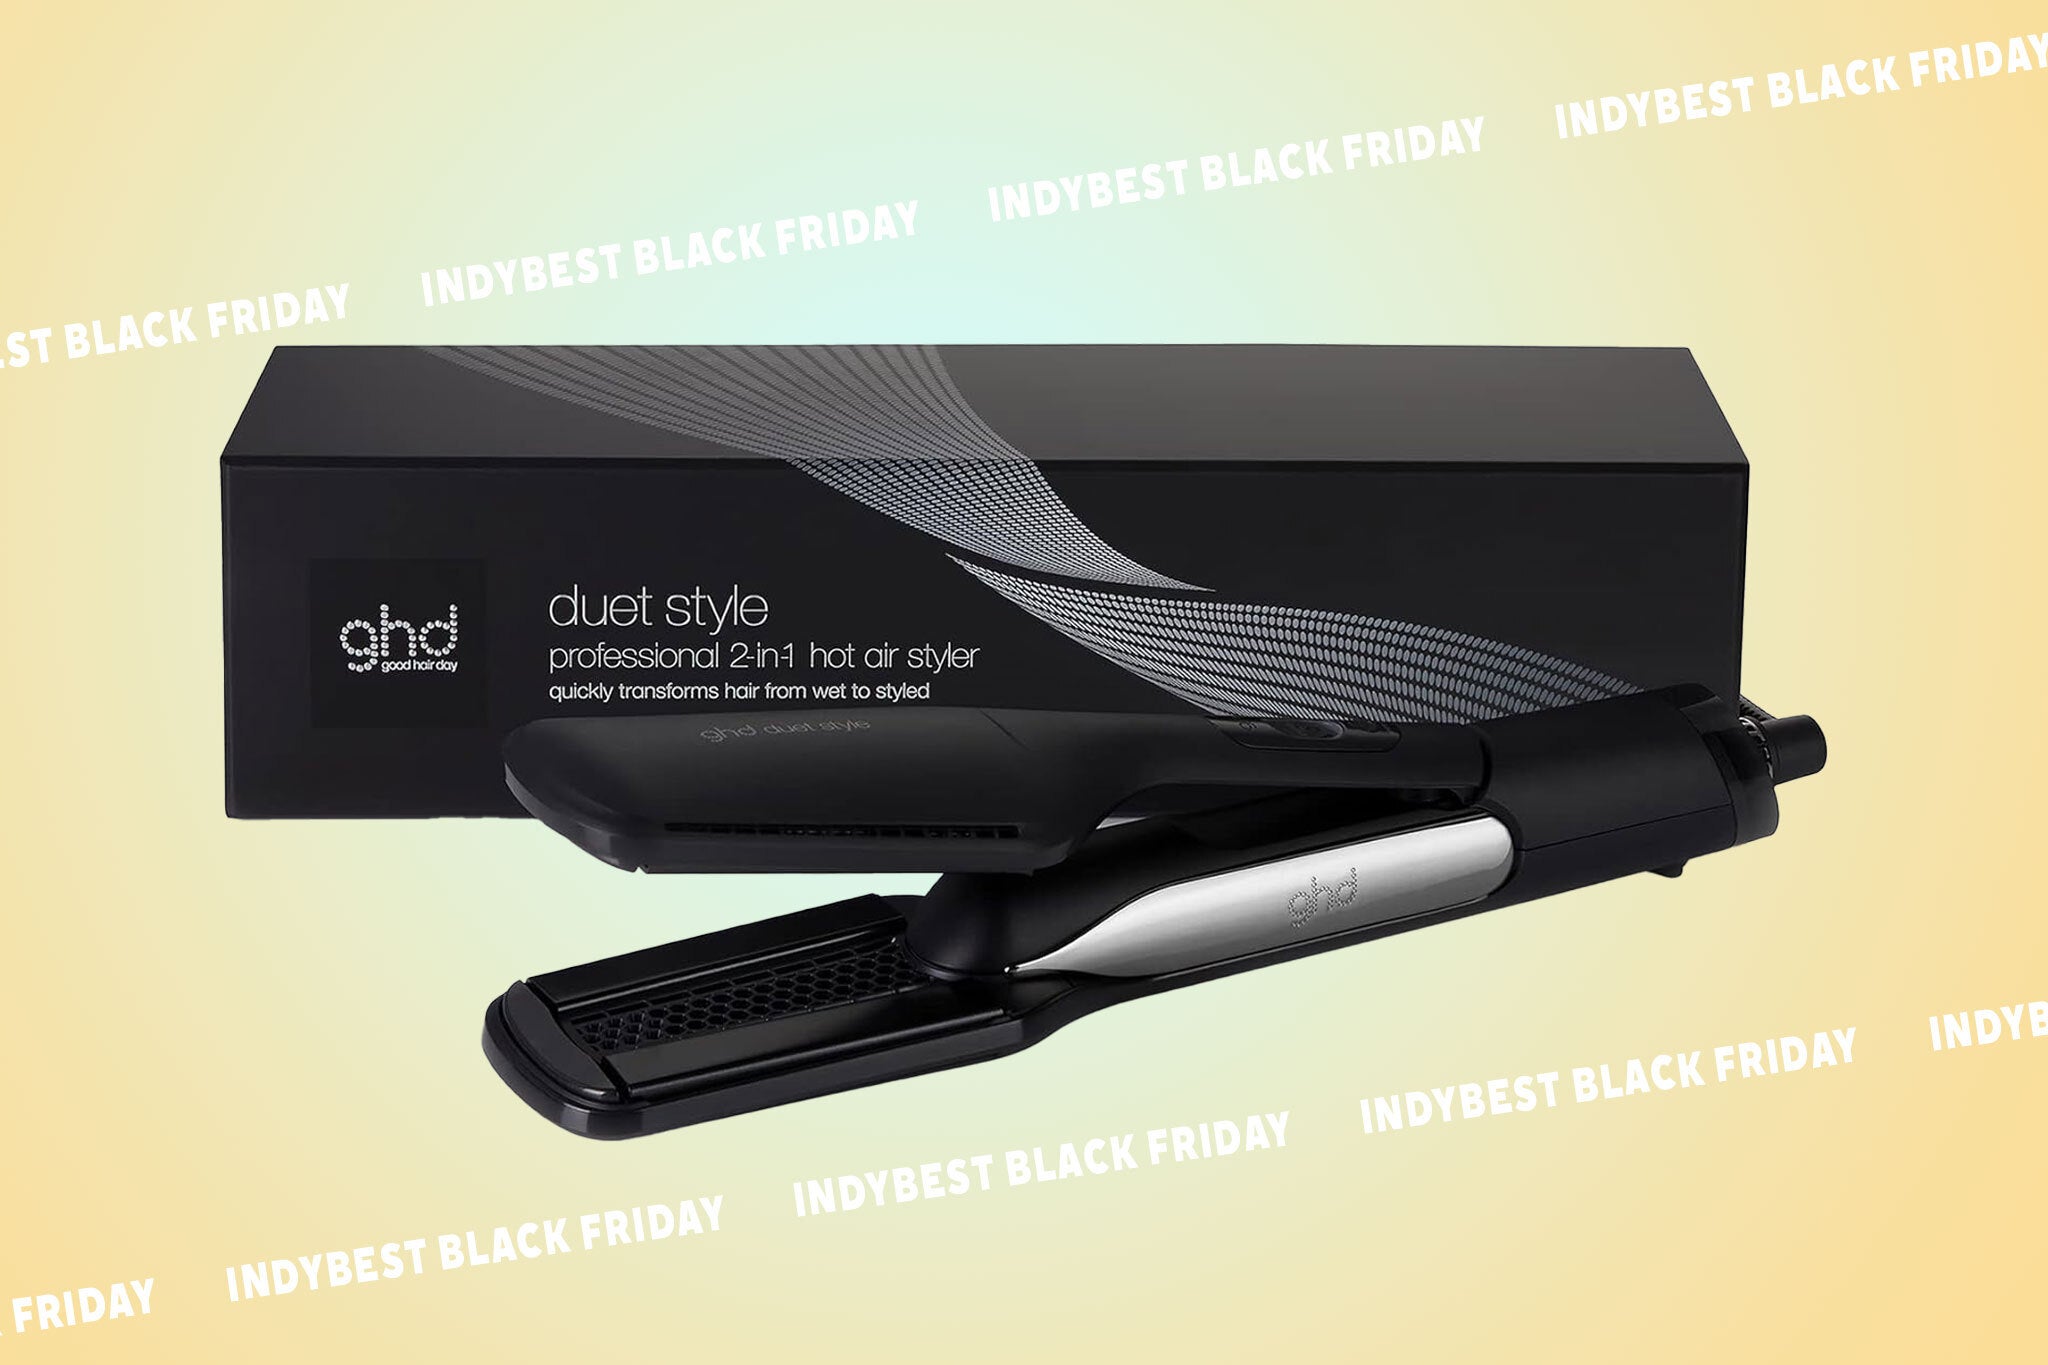 indybest, amazon, black friday, ghd’s duet styler straightener reduced to all-time low for black friday